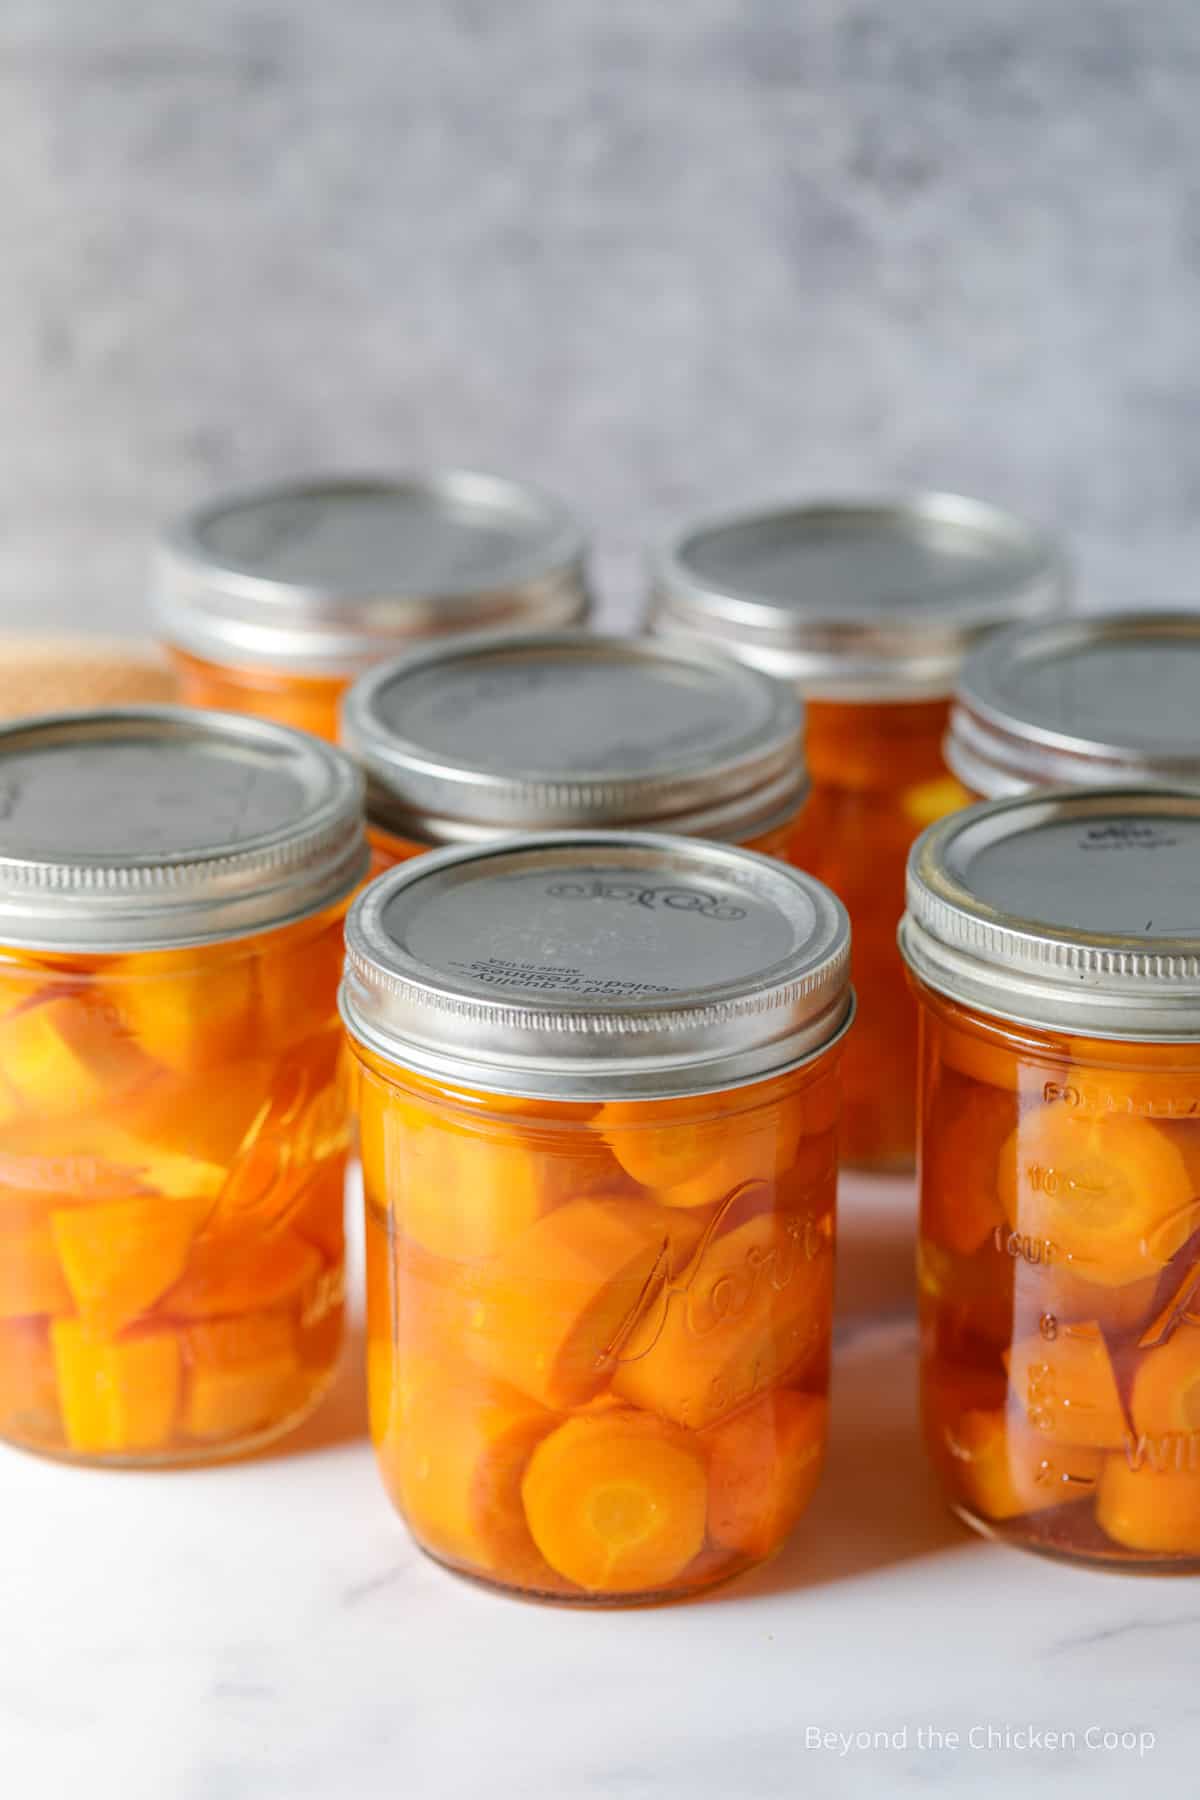 Home canned carrots in canning jars.